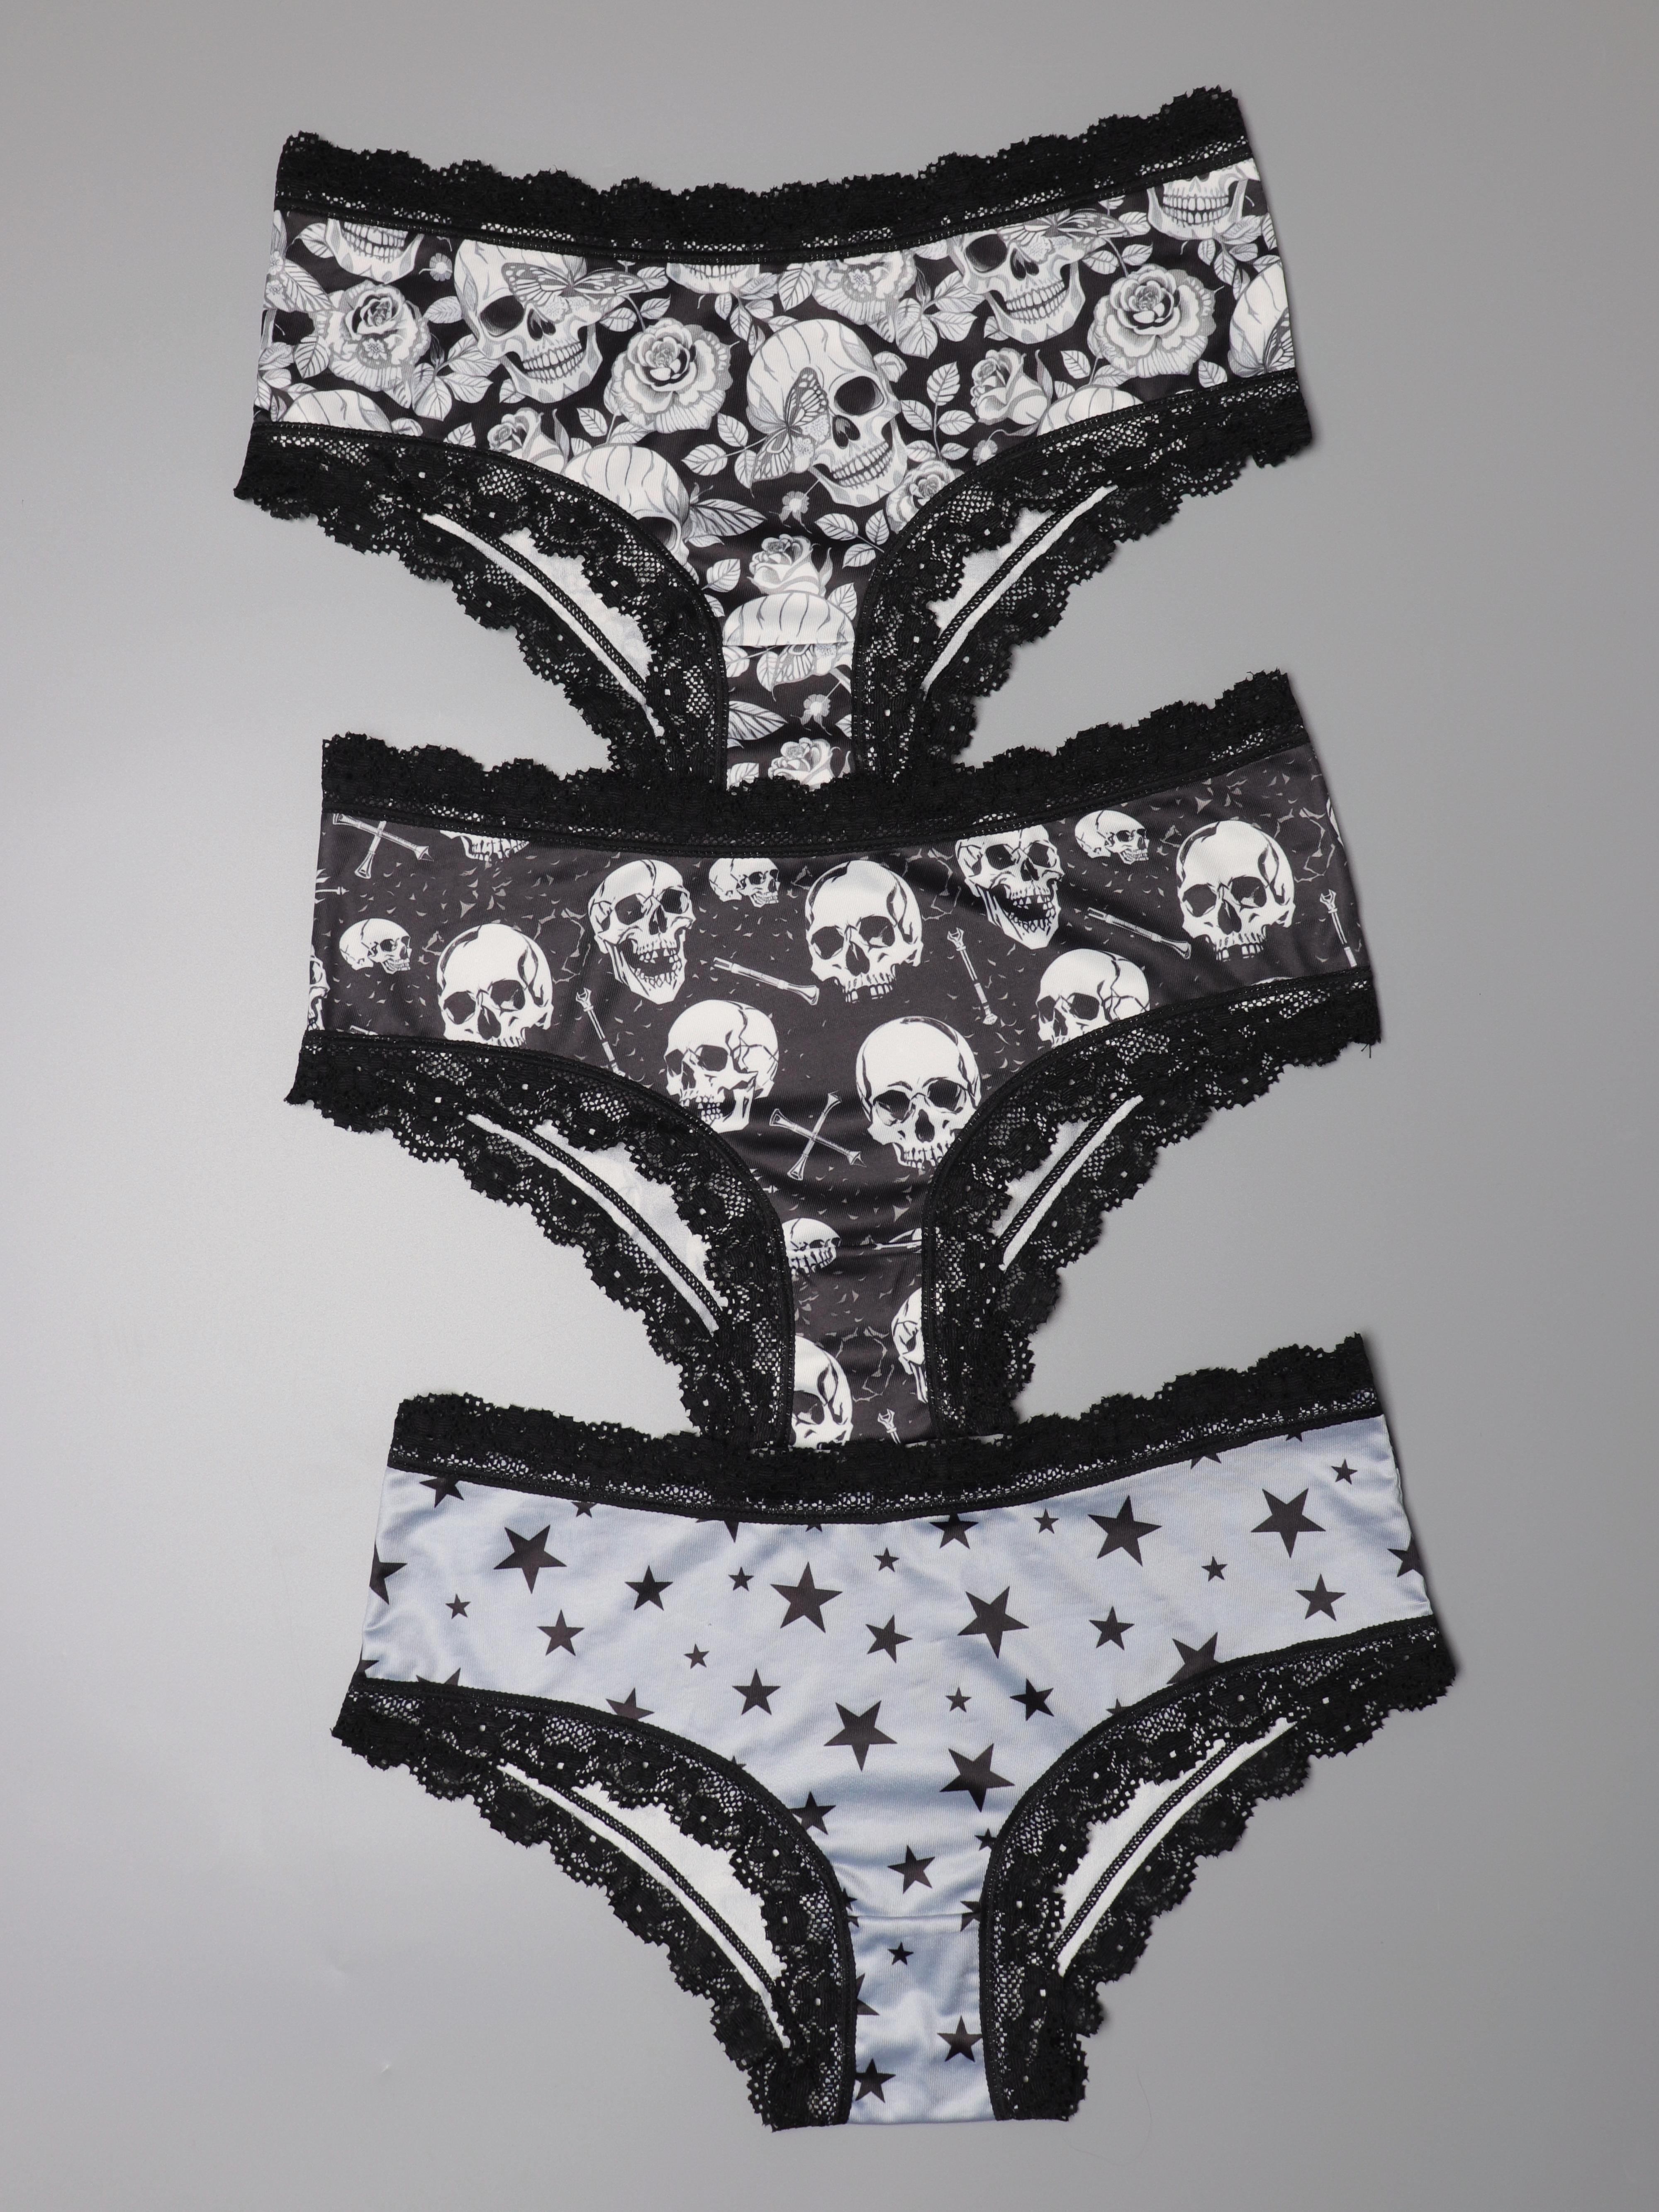 Is That The New Grunge Punk Skull Print Contrast Lace Underwire Bra ??